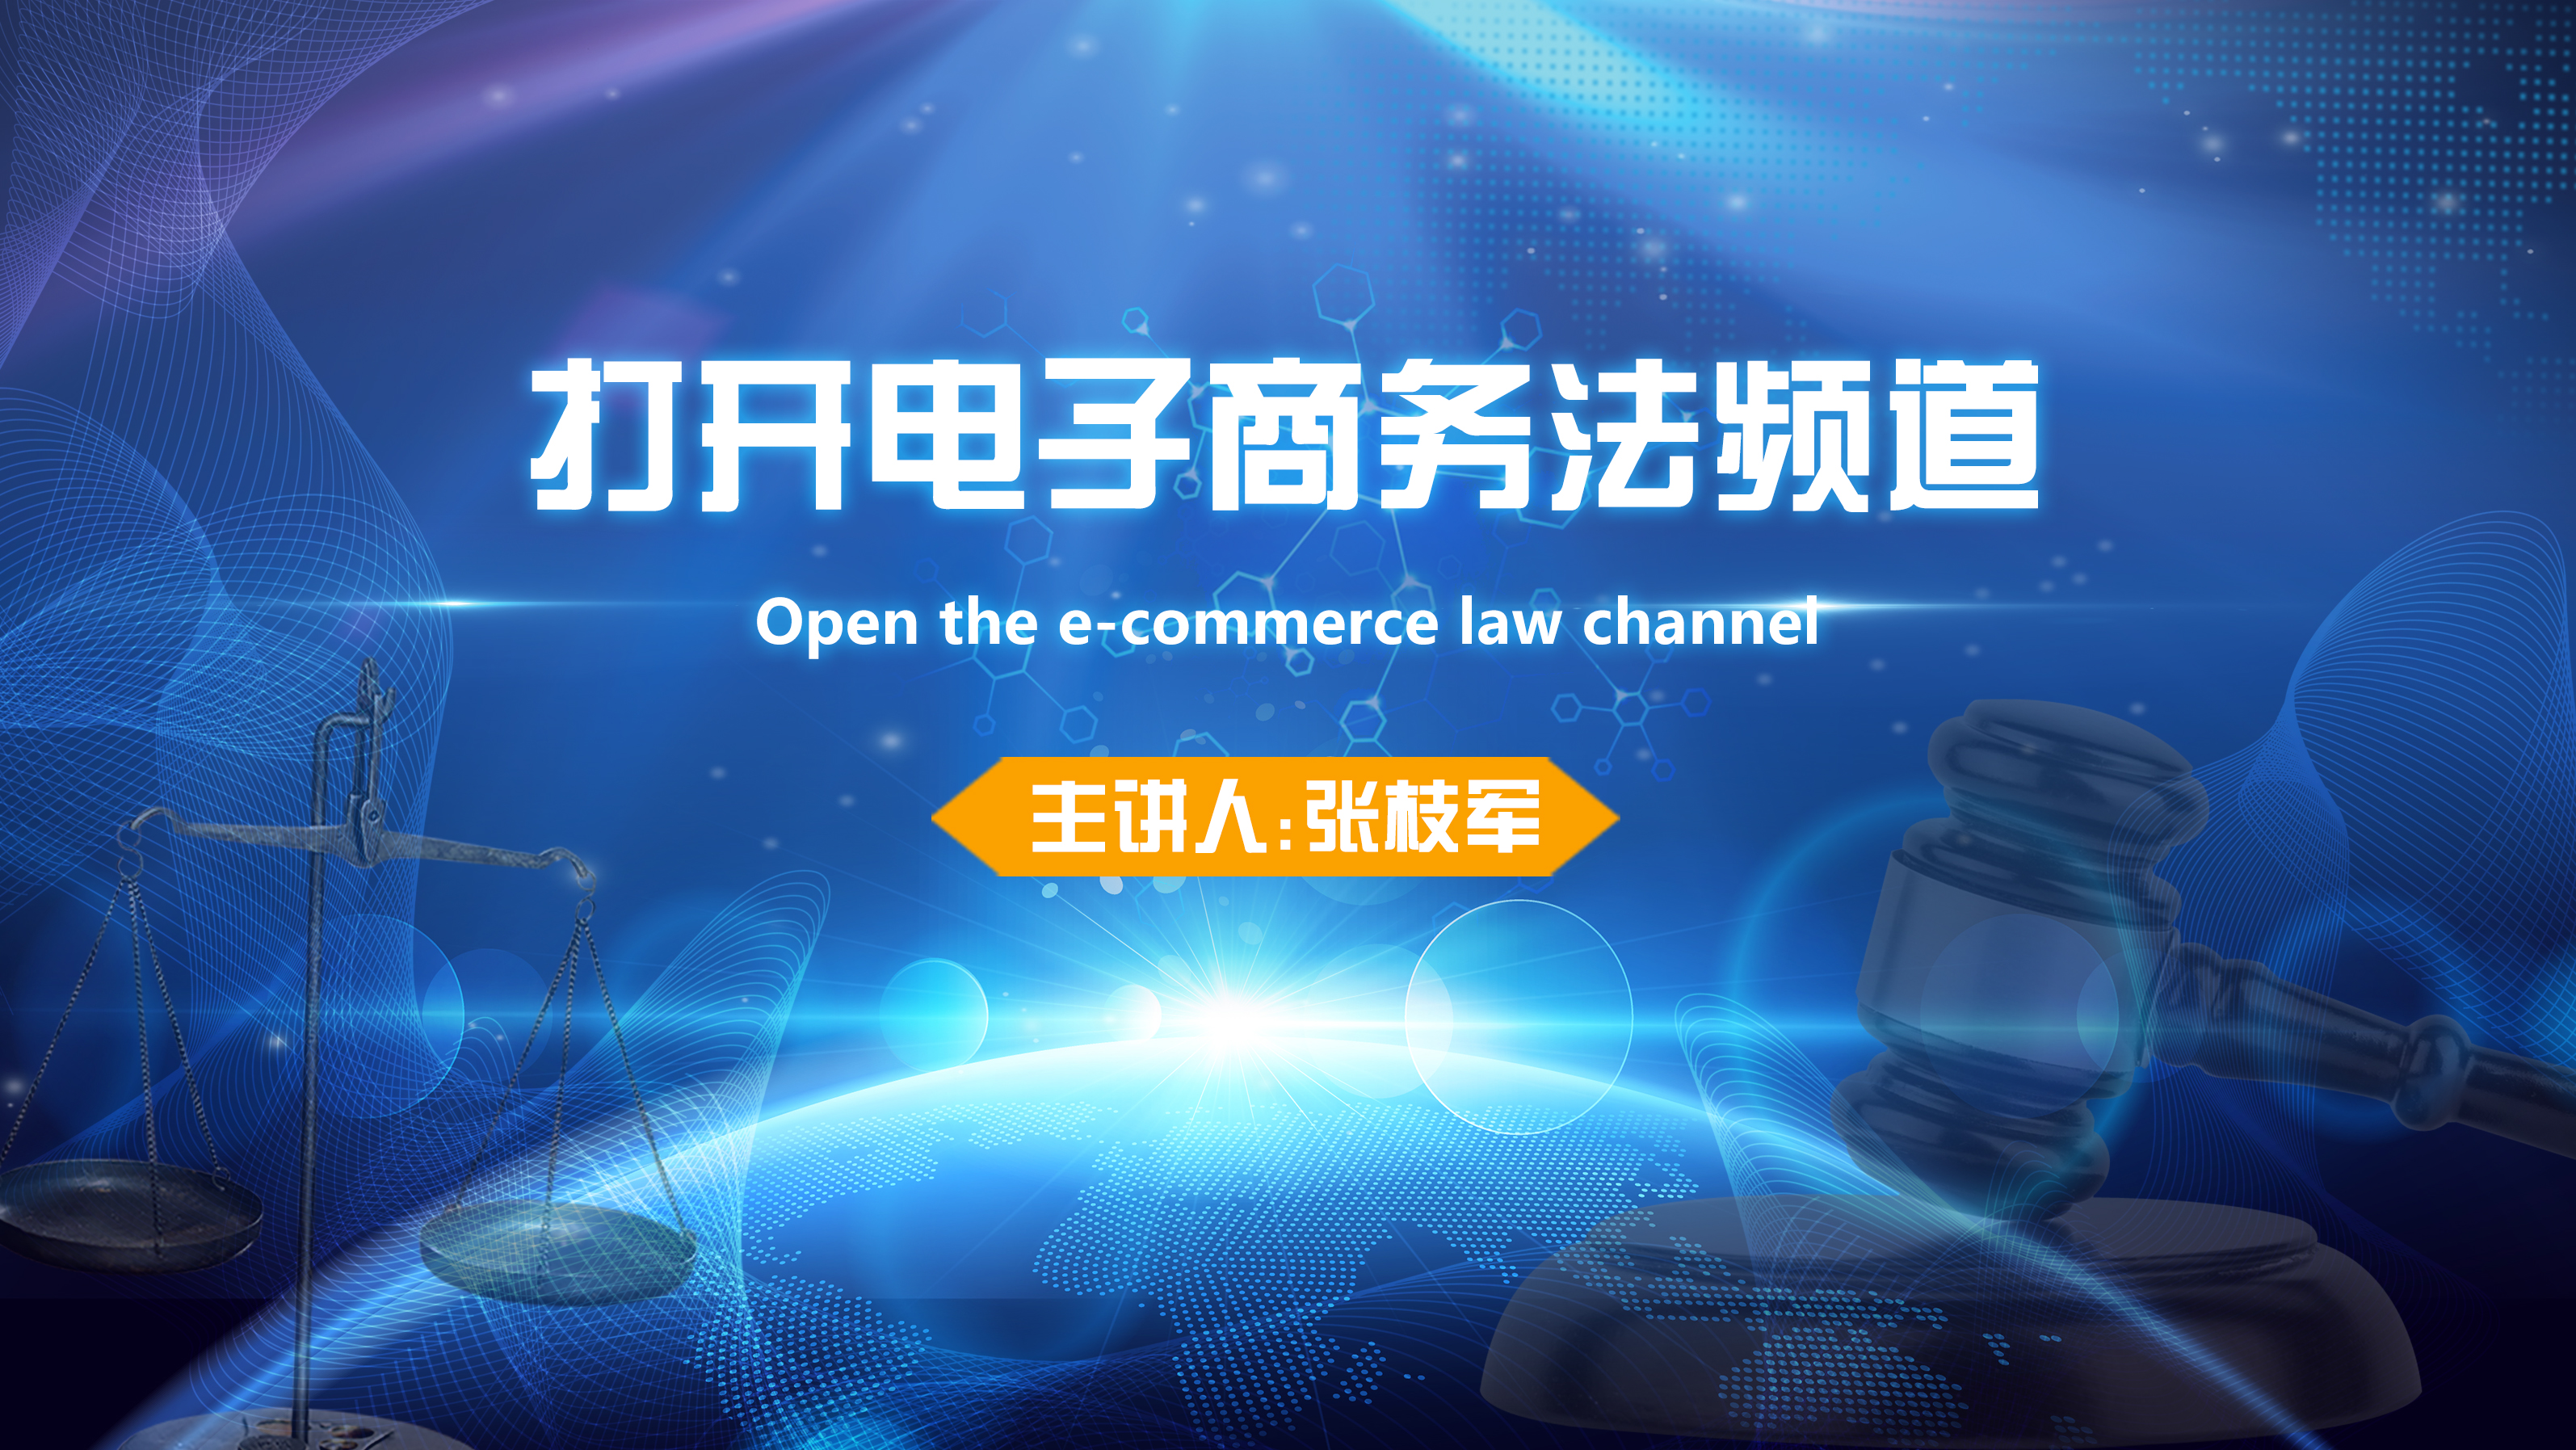 Open the e-commerce law channel